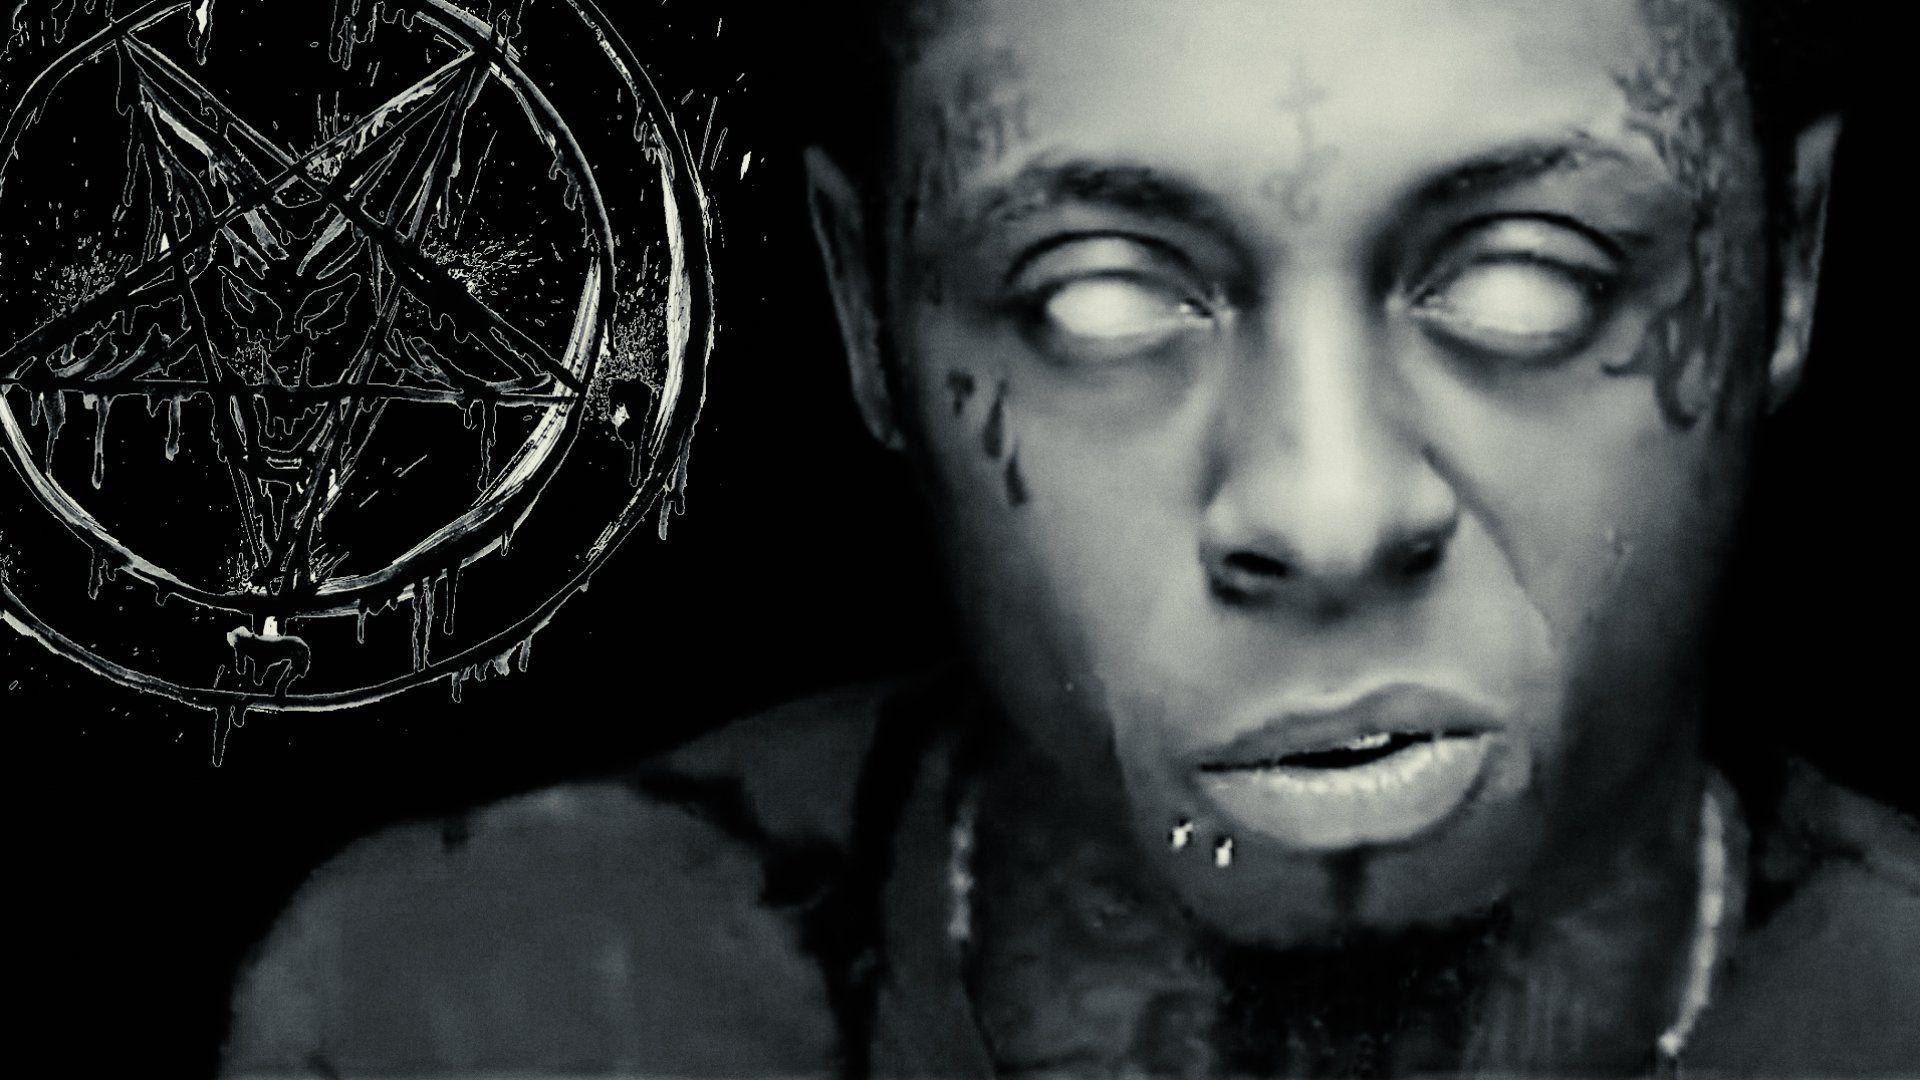 lil wayne wallpaper HD background download Facebook Covers